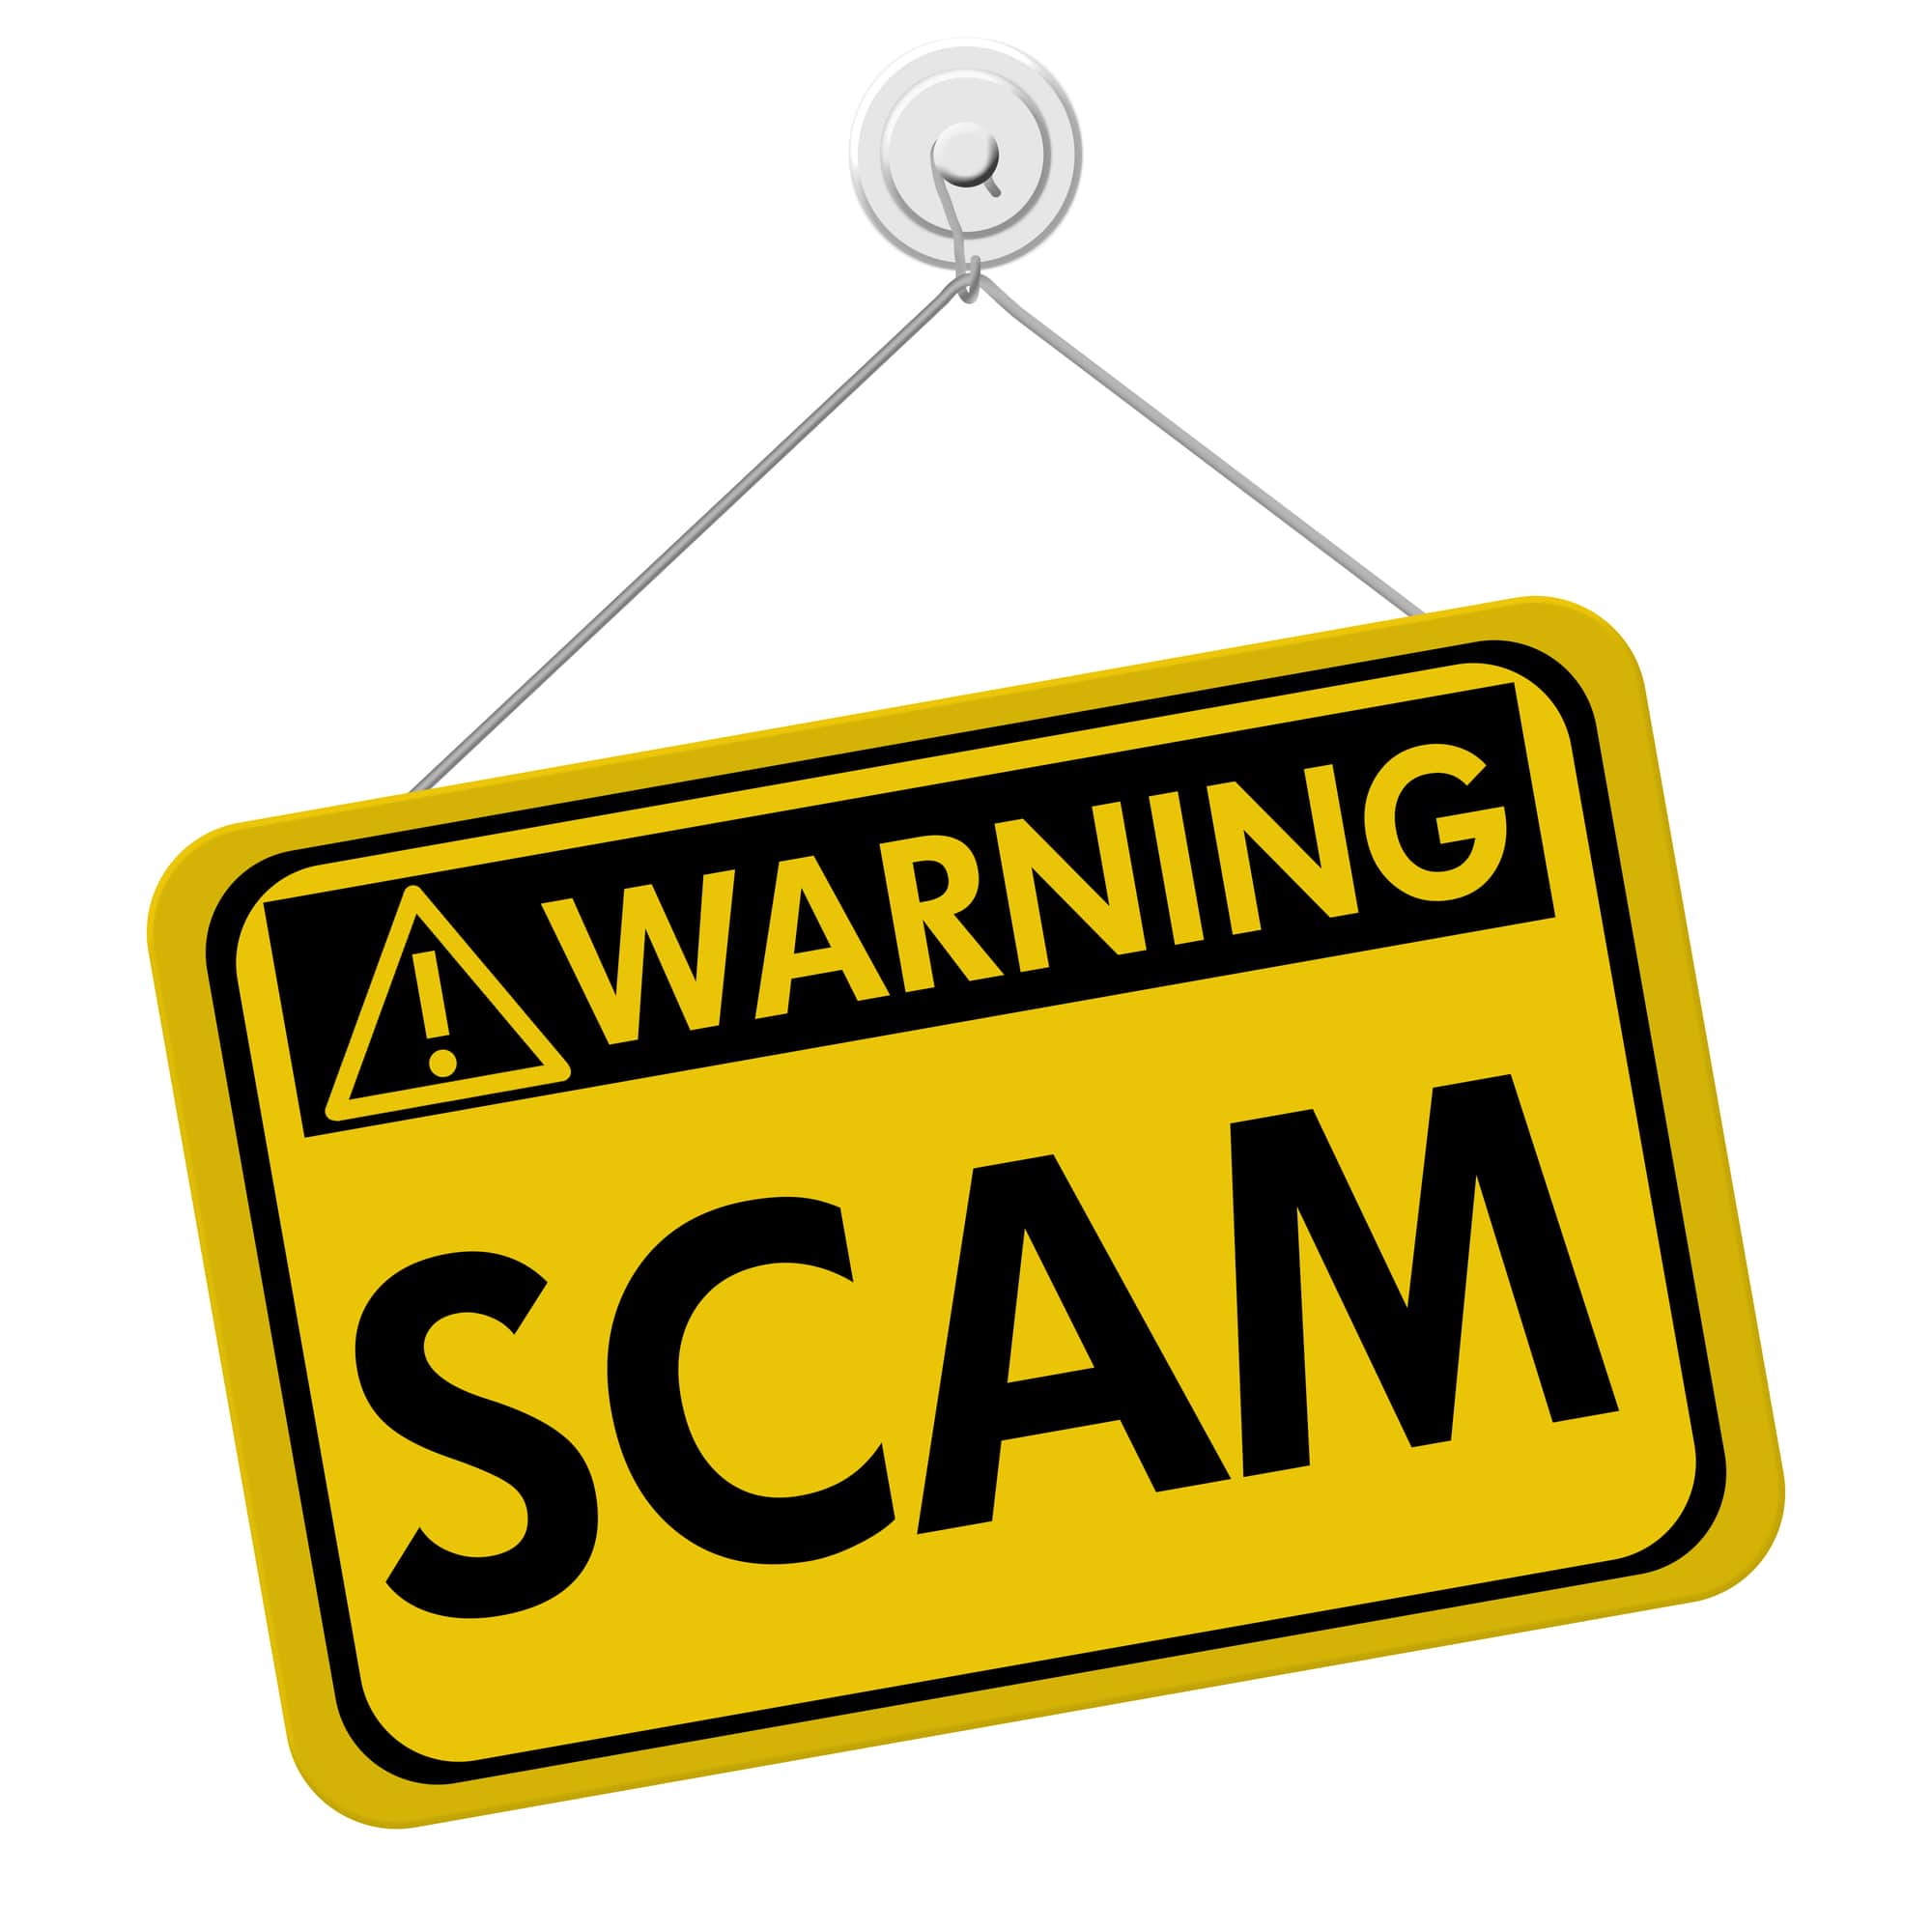 Scam-radar: What crypto scams are out there and how to avoid them